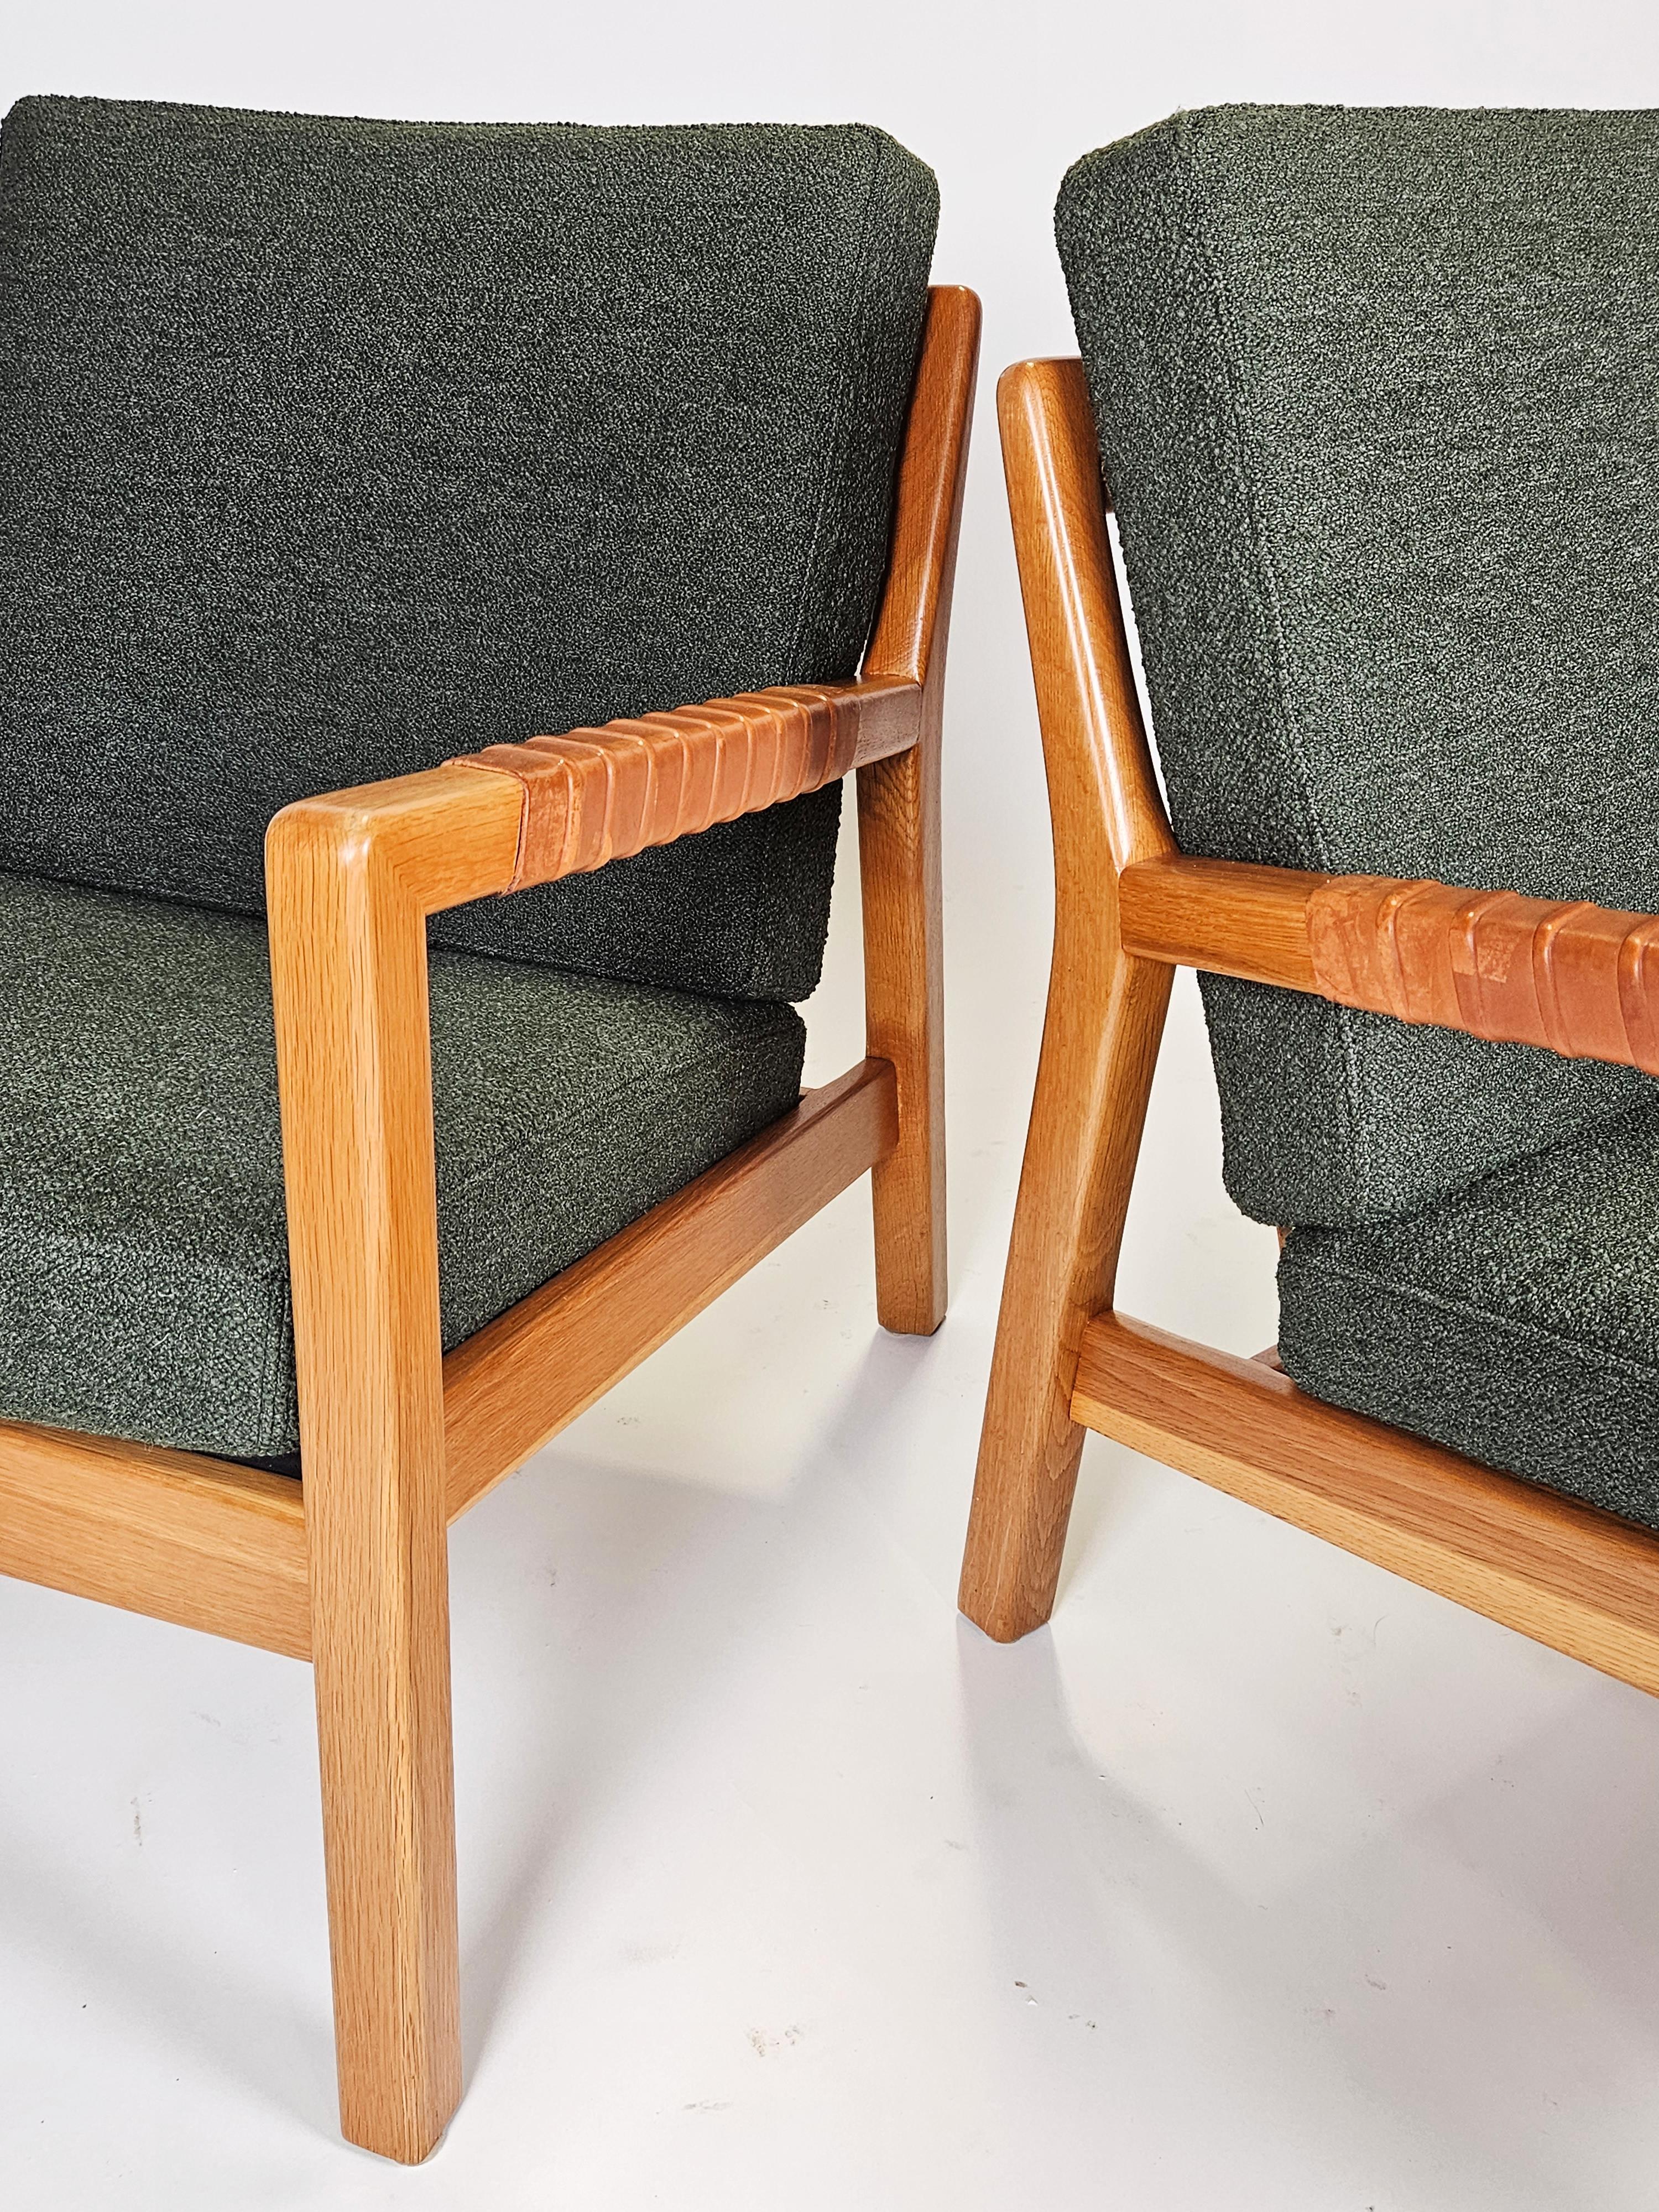 Finnish Scandinavian modern easy chairs by Carl Gustaf Hiort af Ornäs, Finland, 1950s For Sale